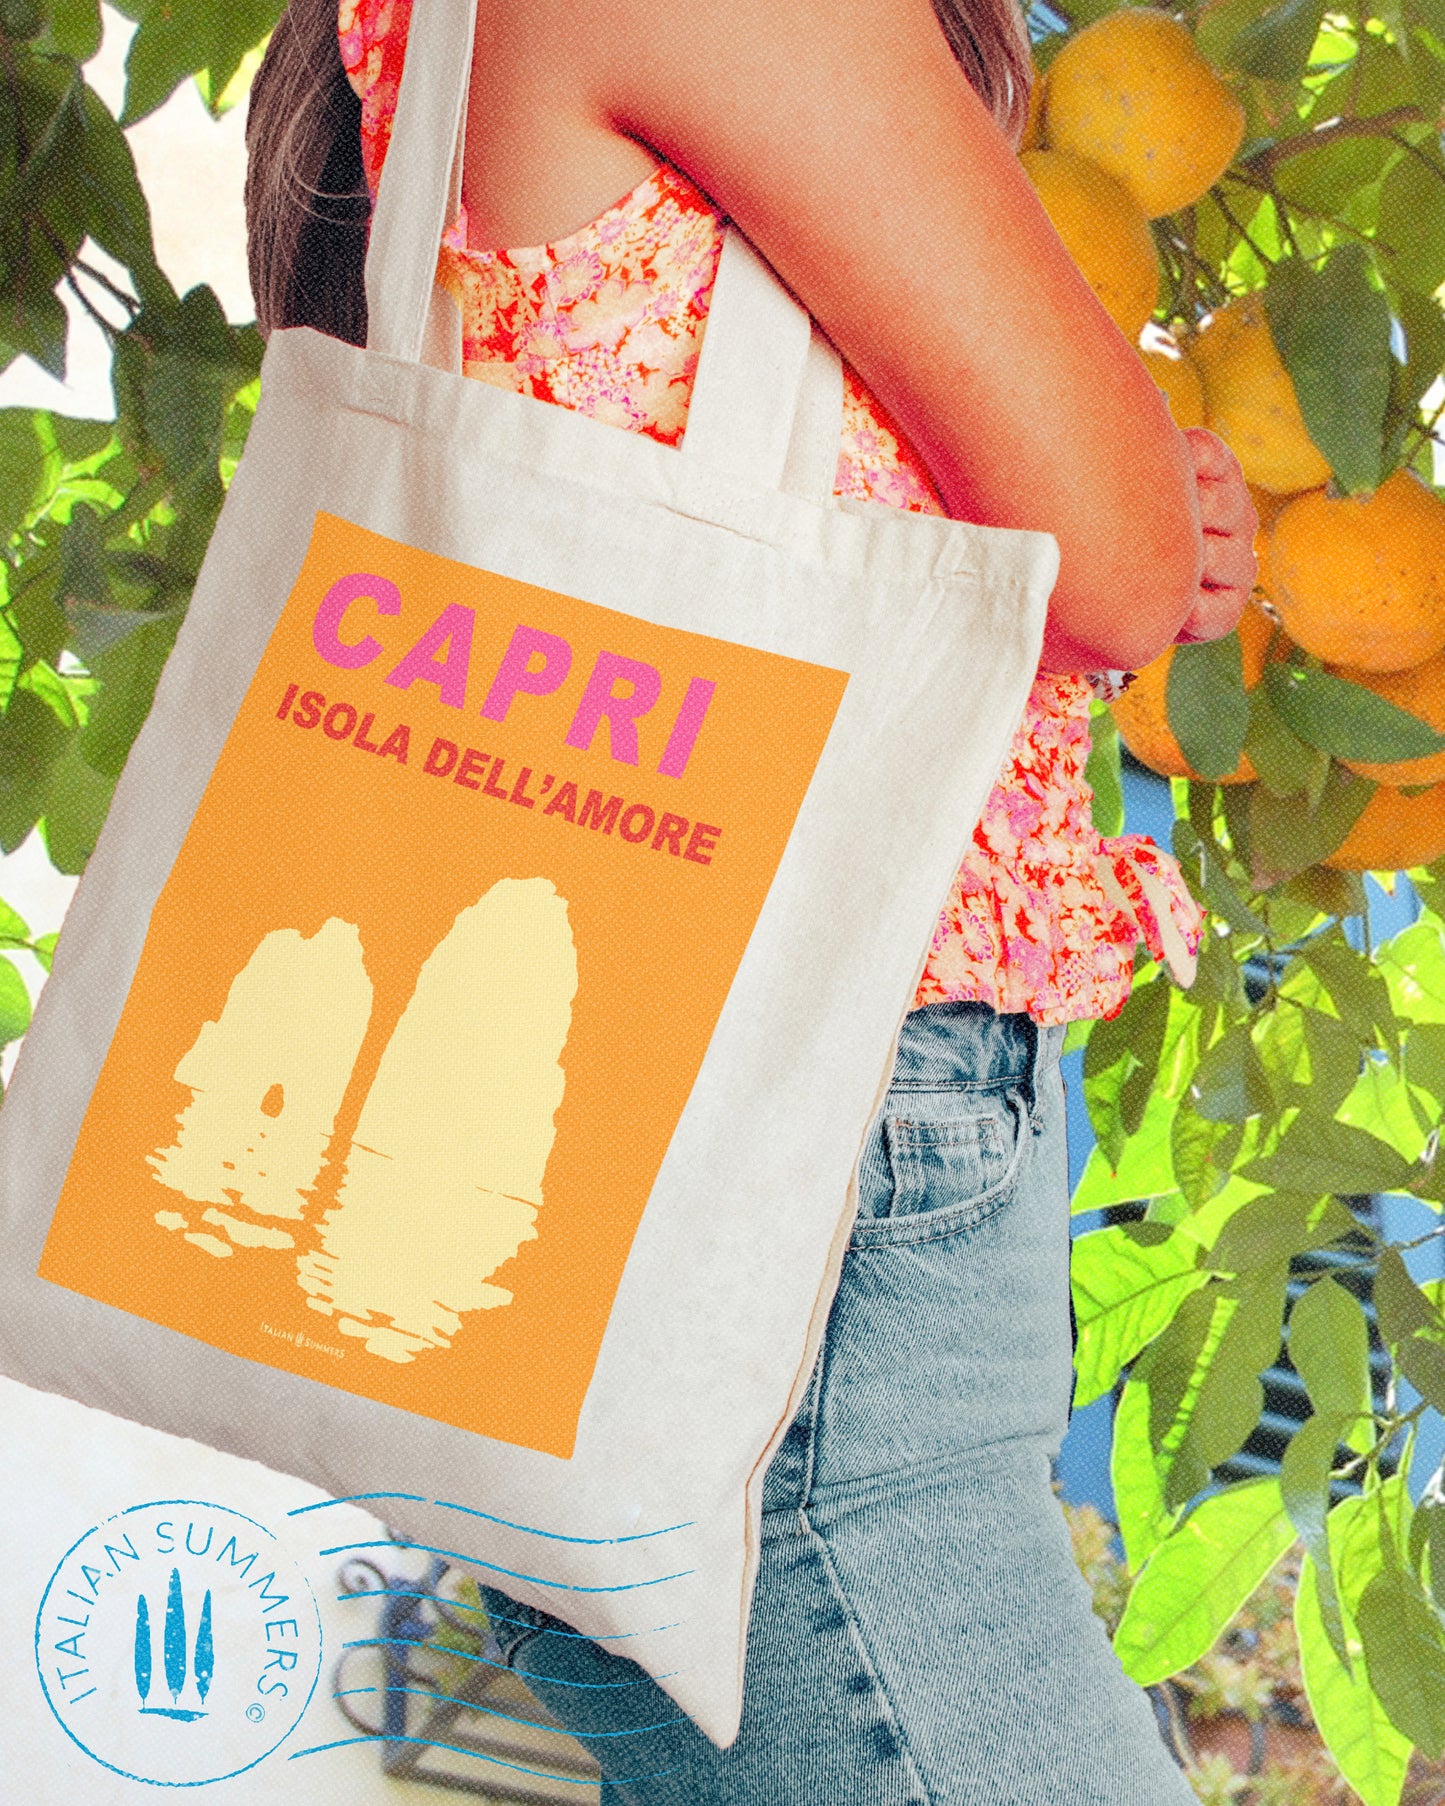 Italy inspired tote bag that represents an orange field containing a watm fuchsia Capri text and under that the text Isola del Amore means Isand of love. Under the text there is the silhouet of the Faraglioni in light warm color. Designed by Italian Summers